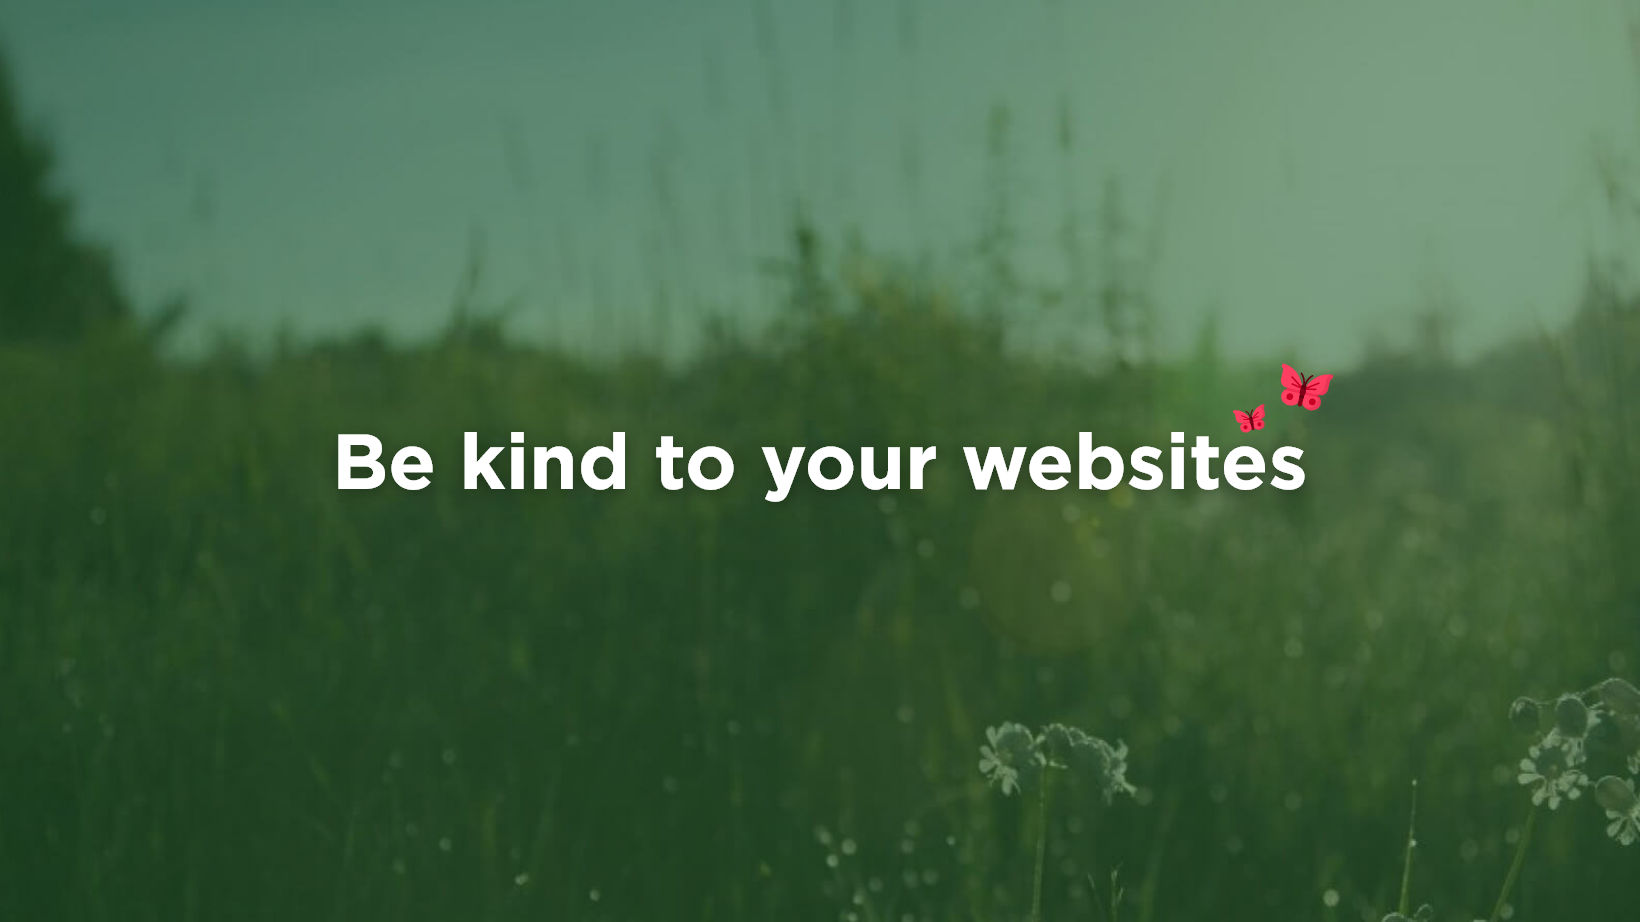 Photo with text: "Be kind to your websites"